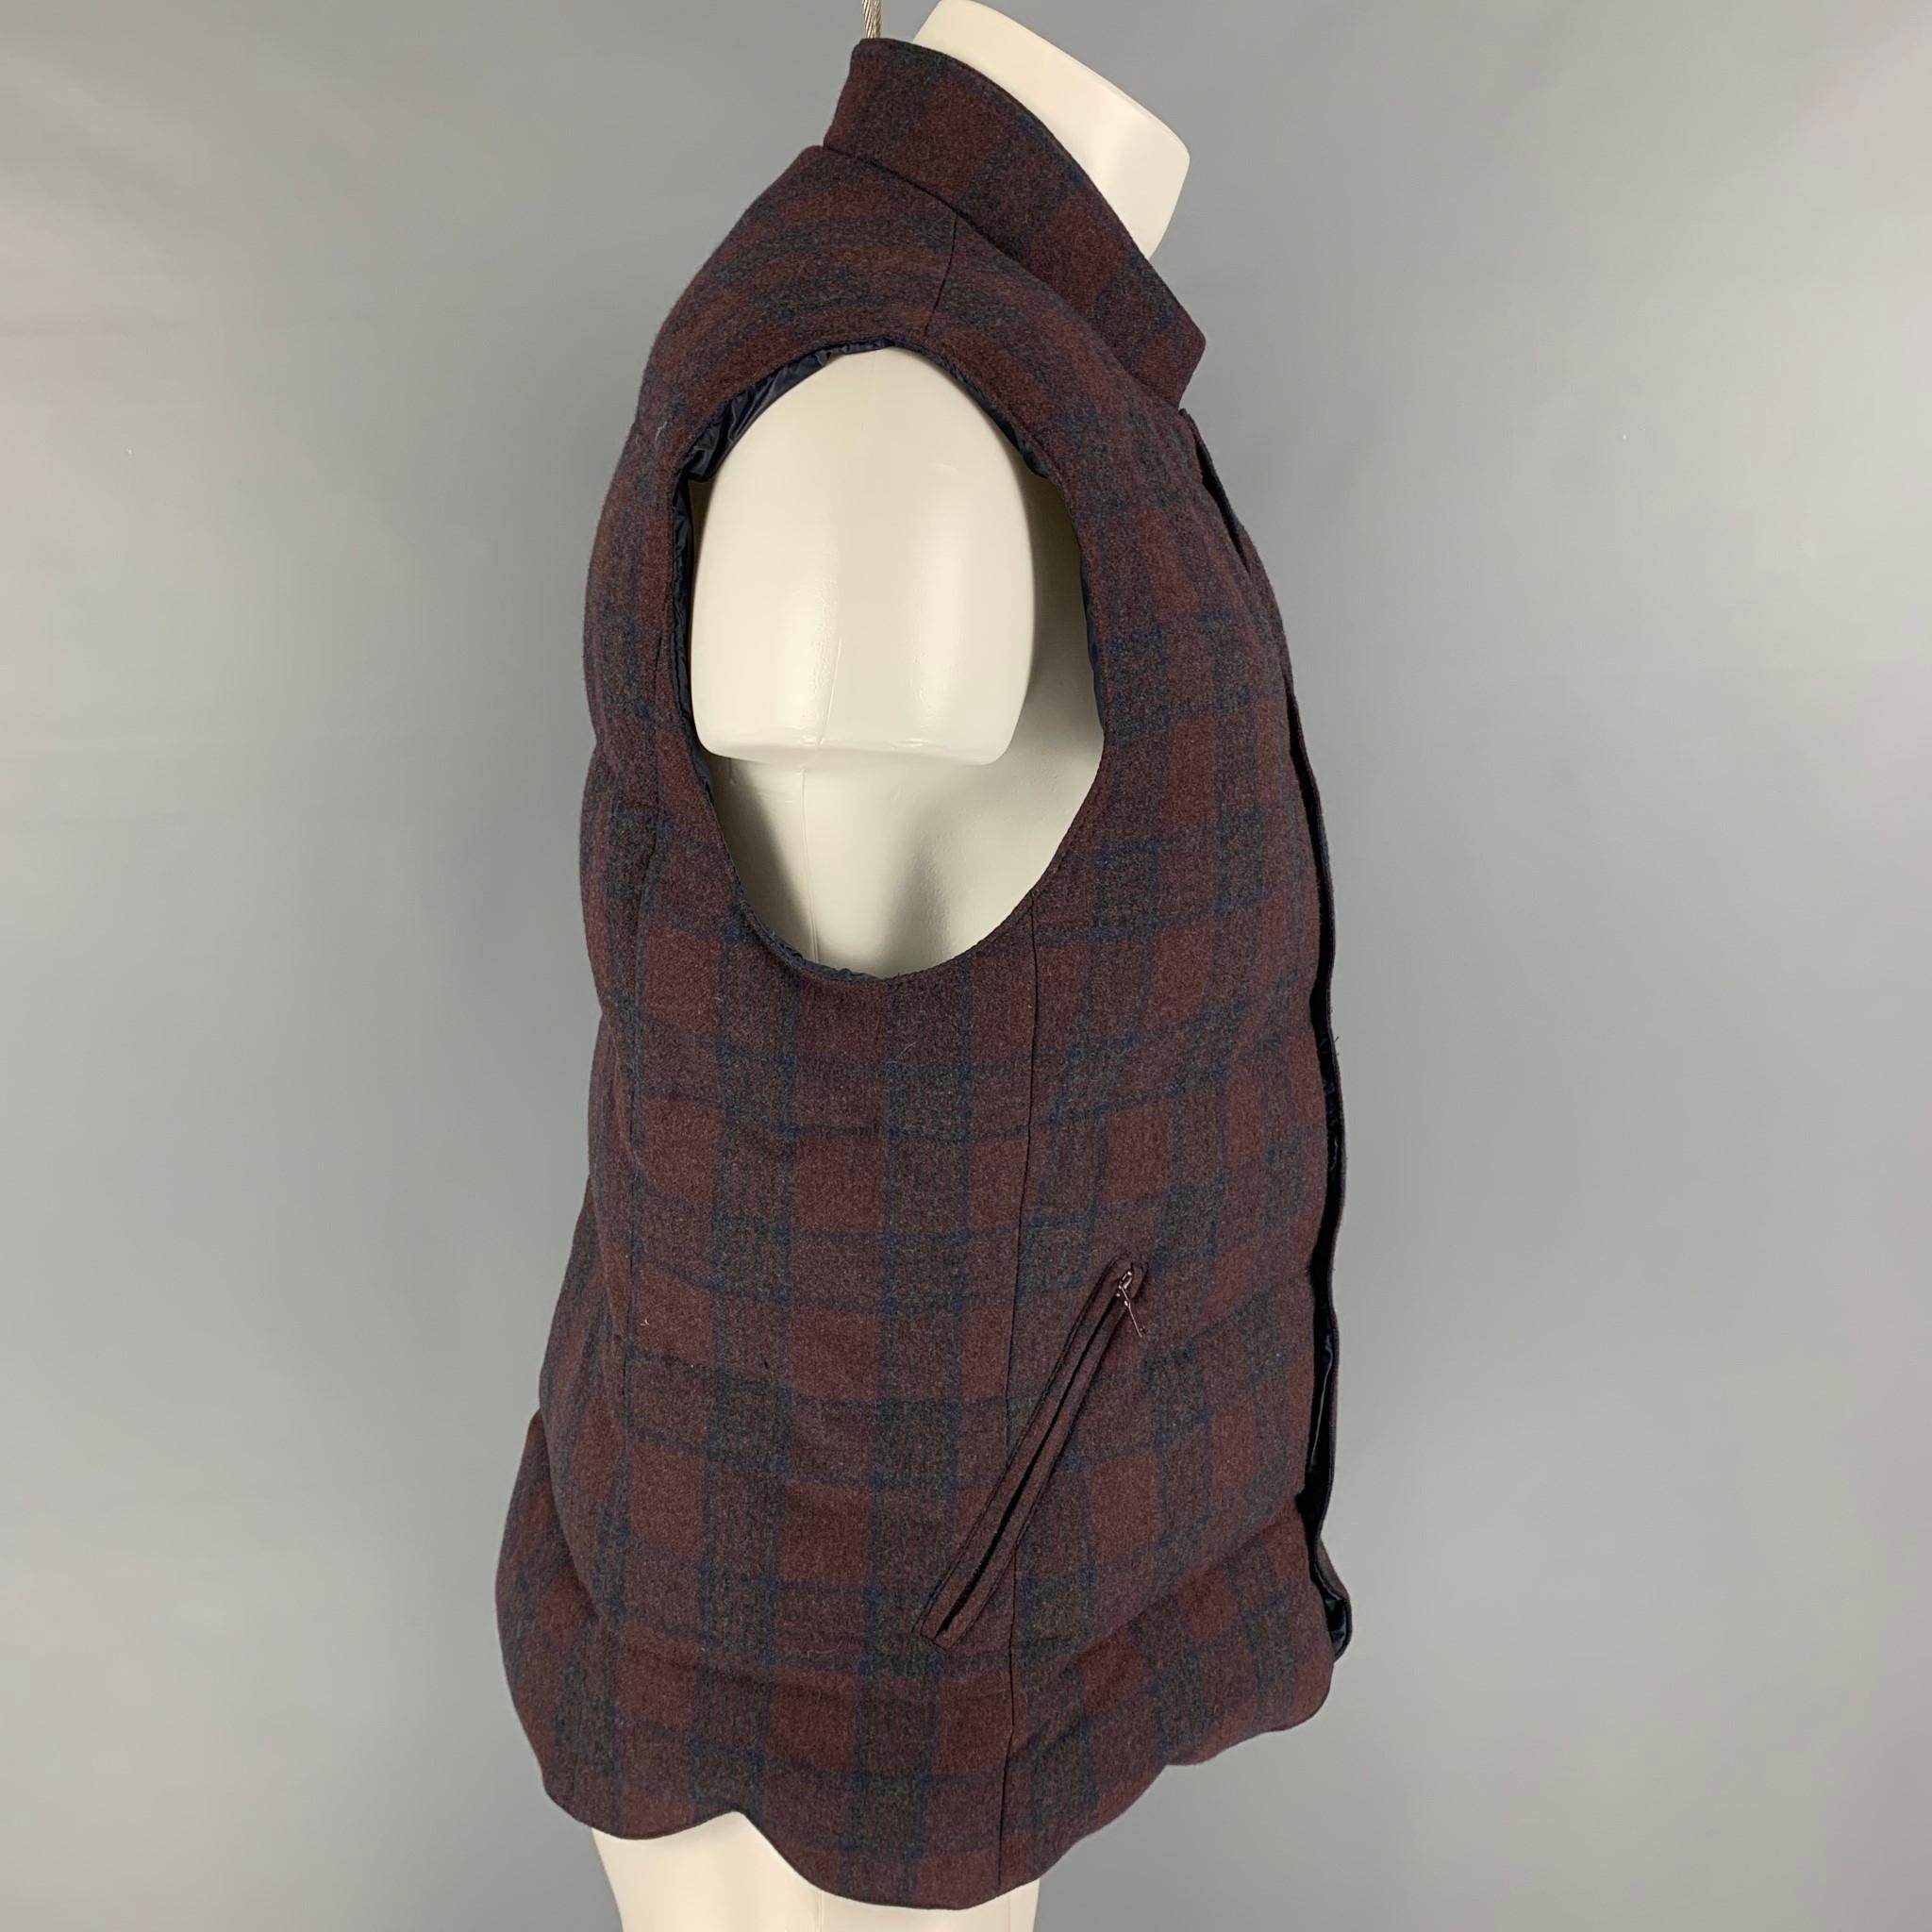 BRUNELLO CUCINELLI vest comes in a brown & burgundy plaid wool blend featuring a stand up collar, zipper pockets, and a snap button closure. Made in Italy. 

Excellent Pre-Owned Condition.
Marked: M

Measurements:

Shoulder: 18 in.
Chest: 42